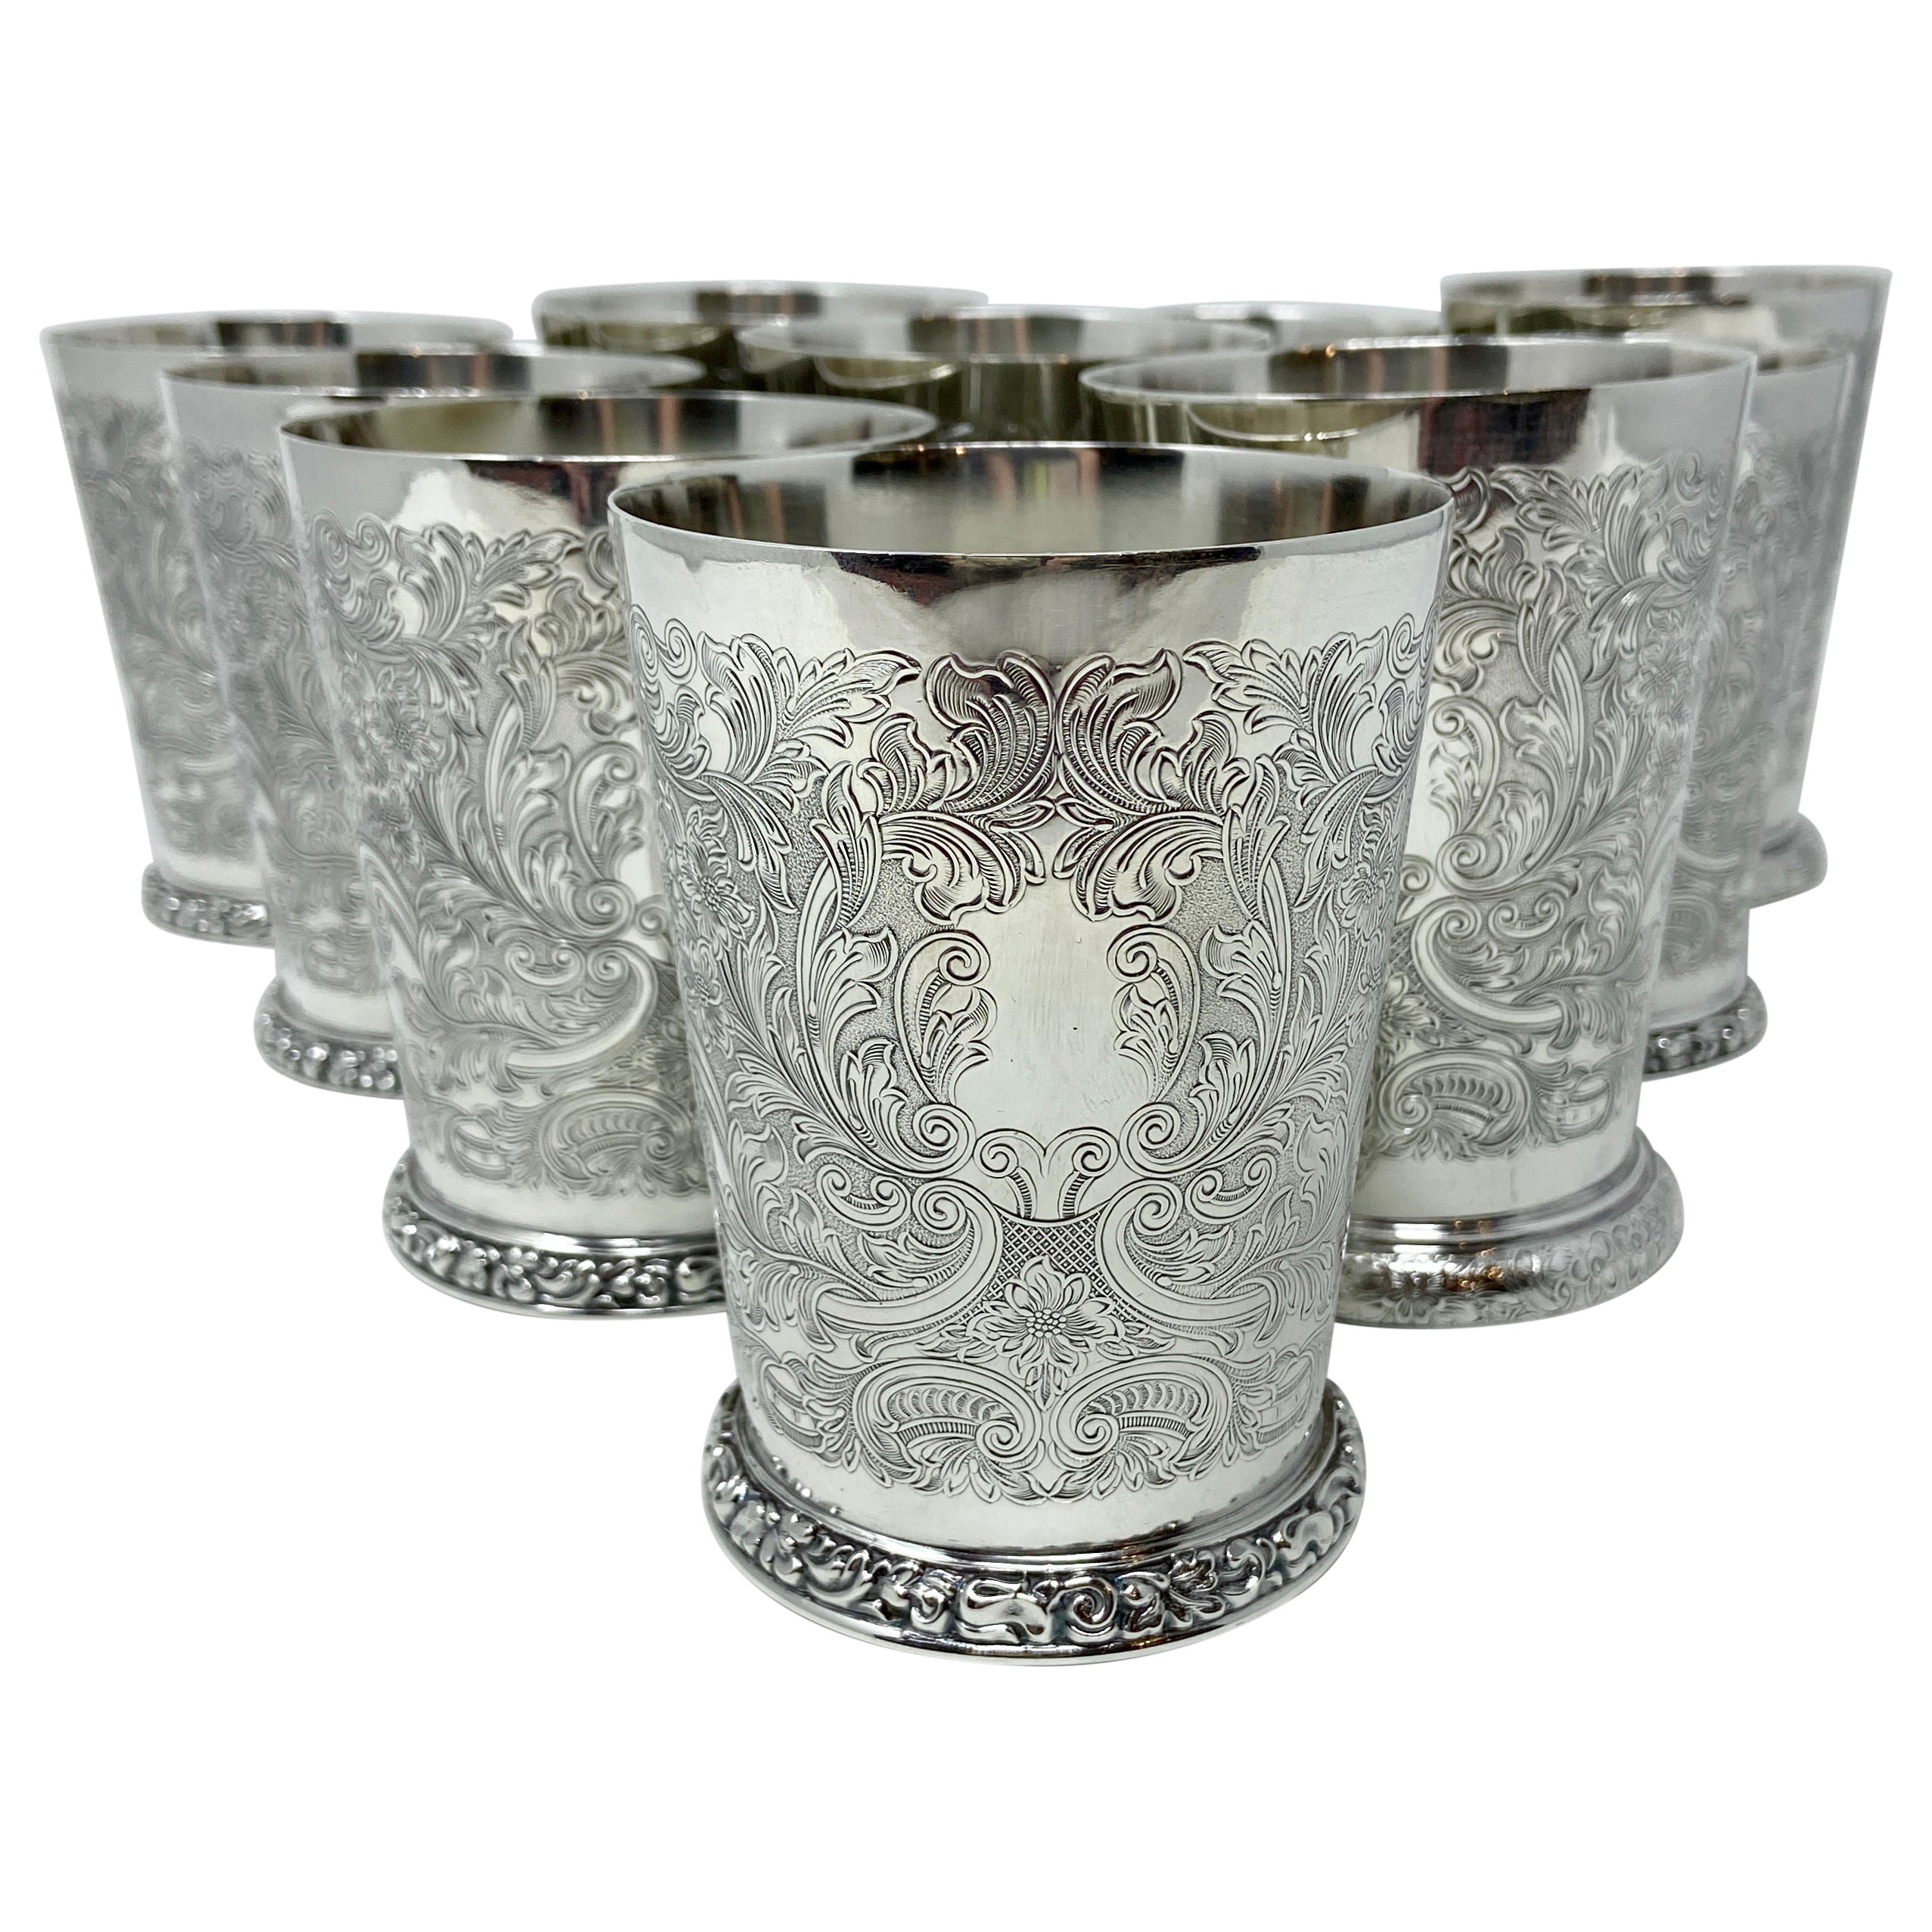 Set of 10 Estate English Silver-Plated Finely Engraved Mint Julep Cups, Ca. 1950